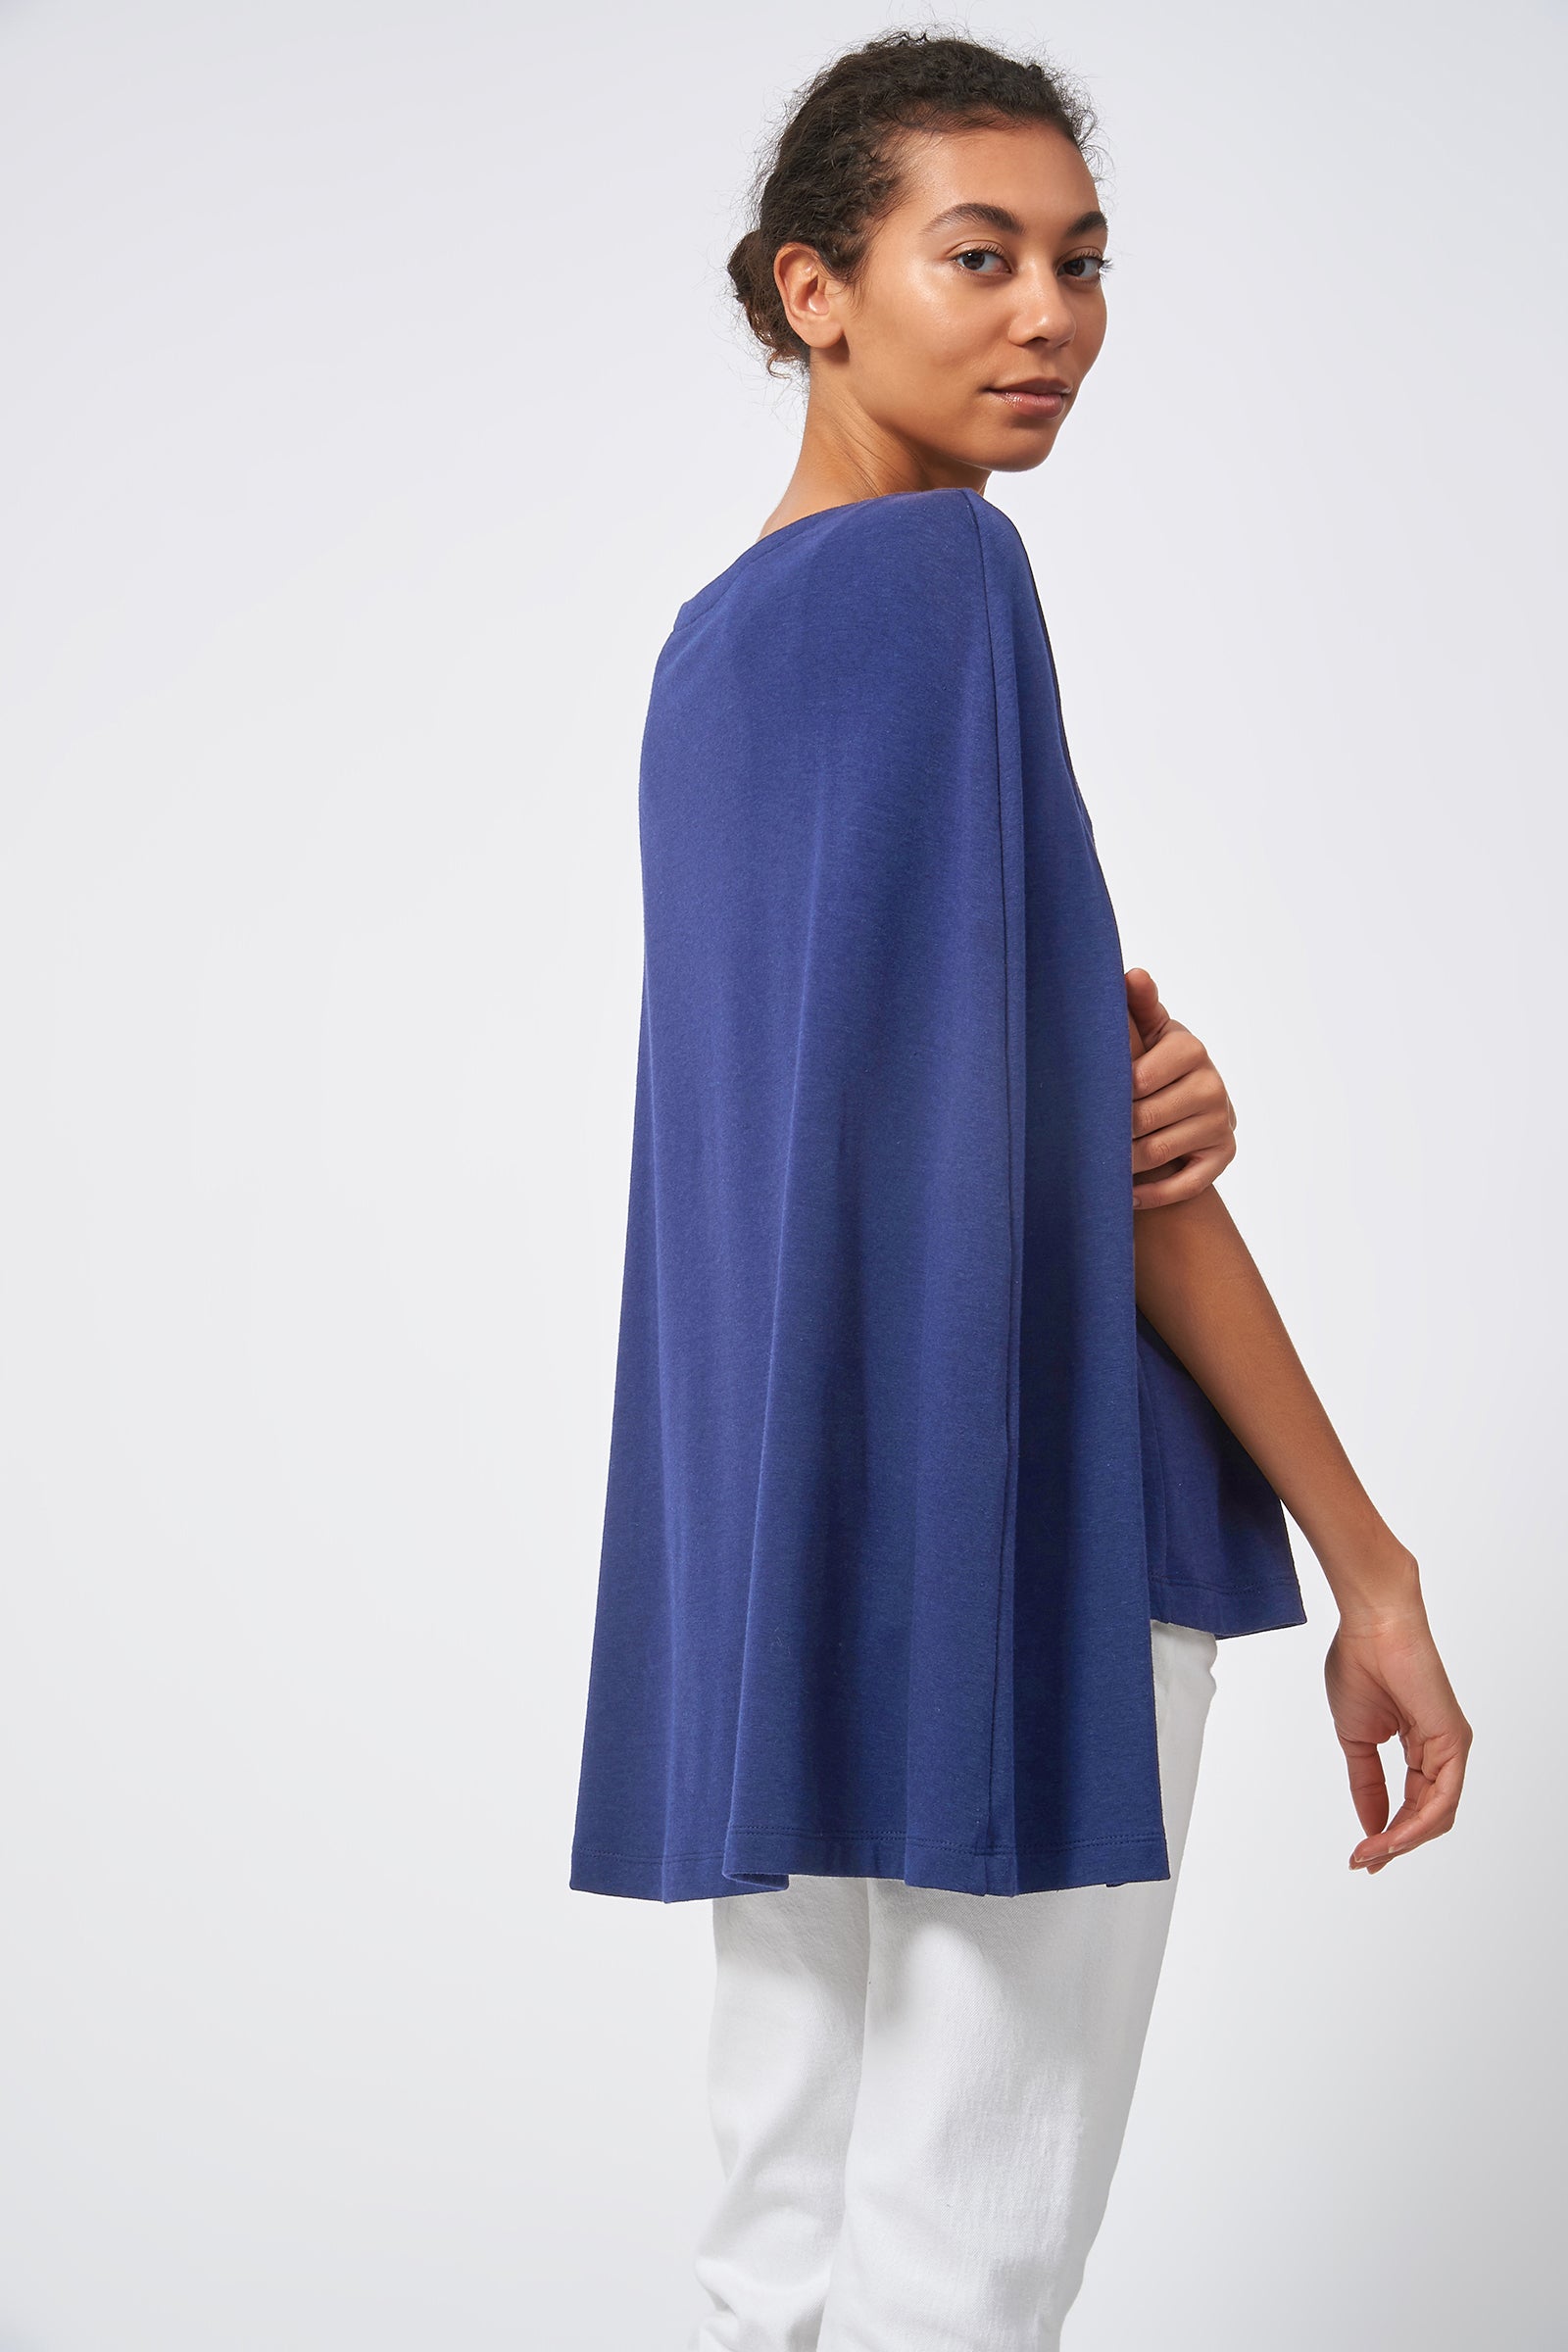 Kal Rieman Cape Sweatshirt in Bamboo Terry Blue image of the back view